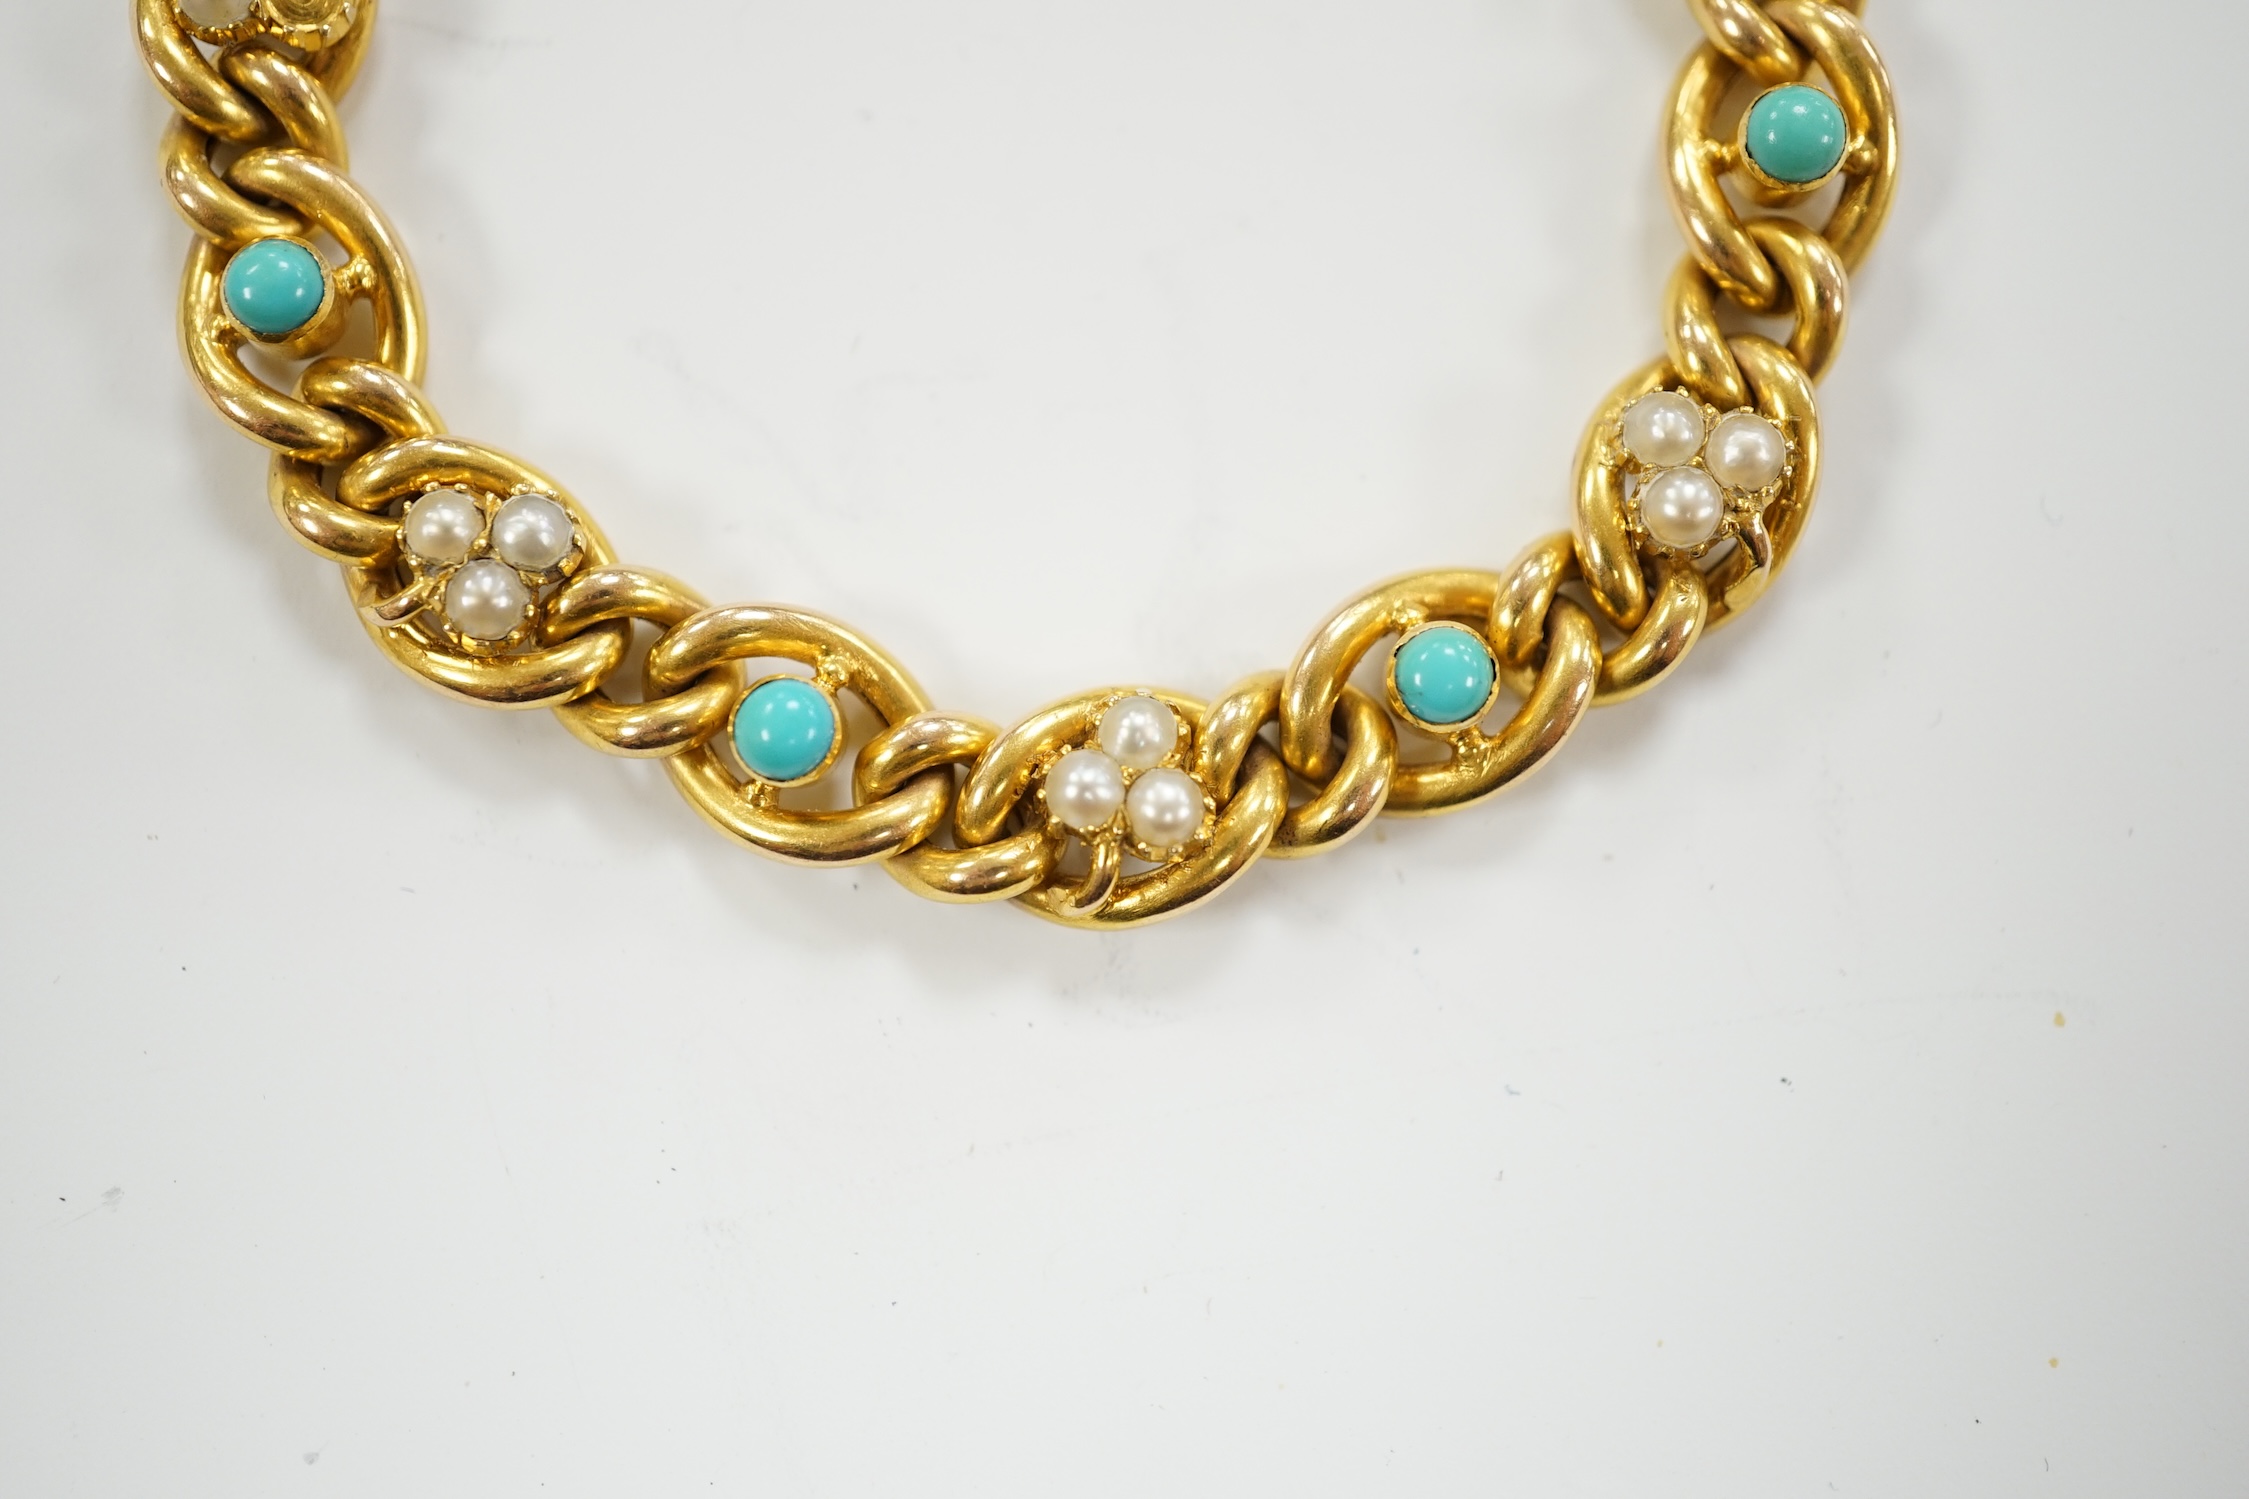 An Edwardian yellow metal (stamped 15), seed pearl cluster and turquoise bead set curb link bracelet, 18cm, gross weight 16.2 grams.